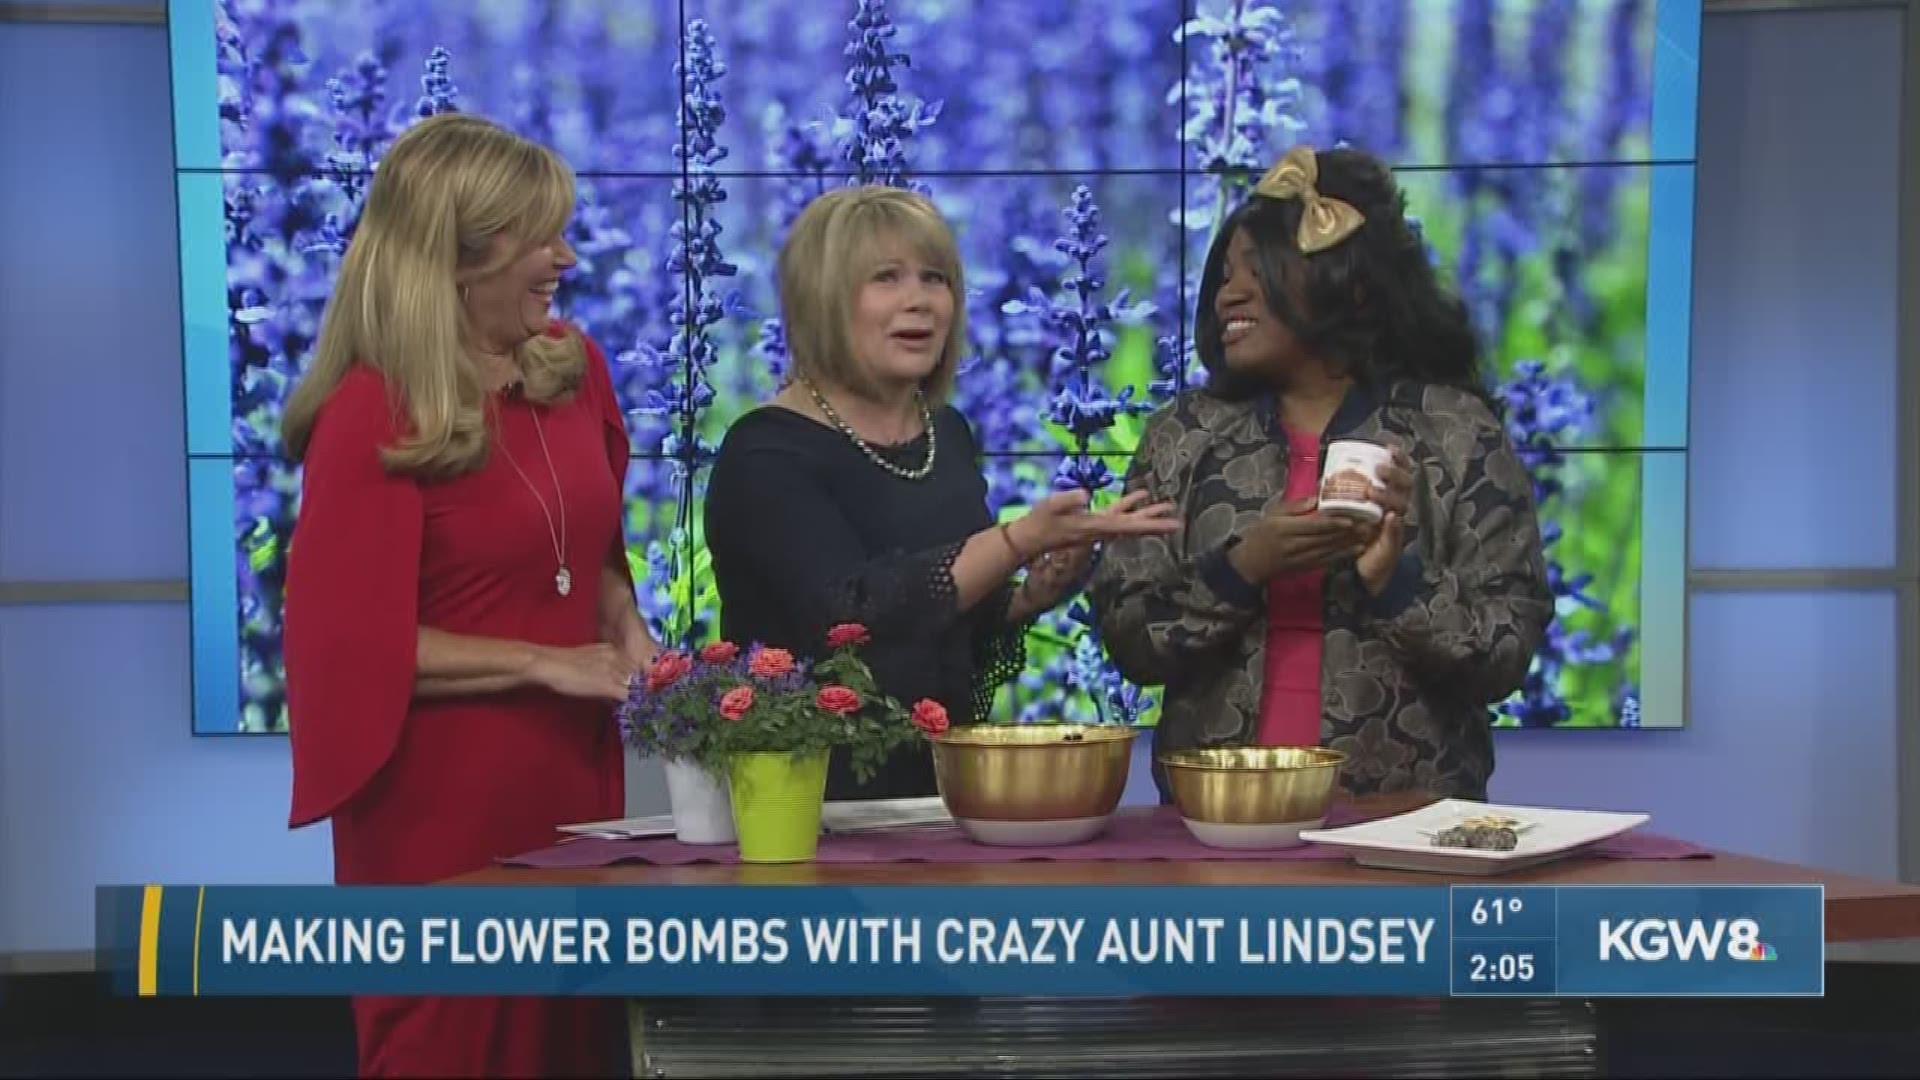 Making flower bombs with Crazy Aunt Lindsey